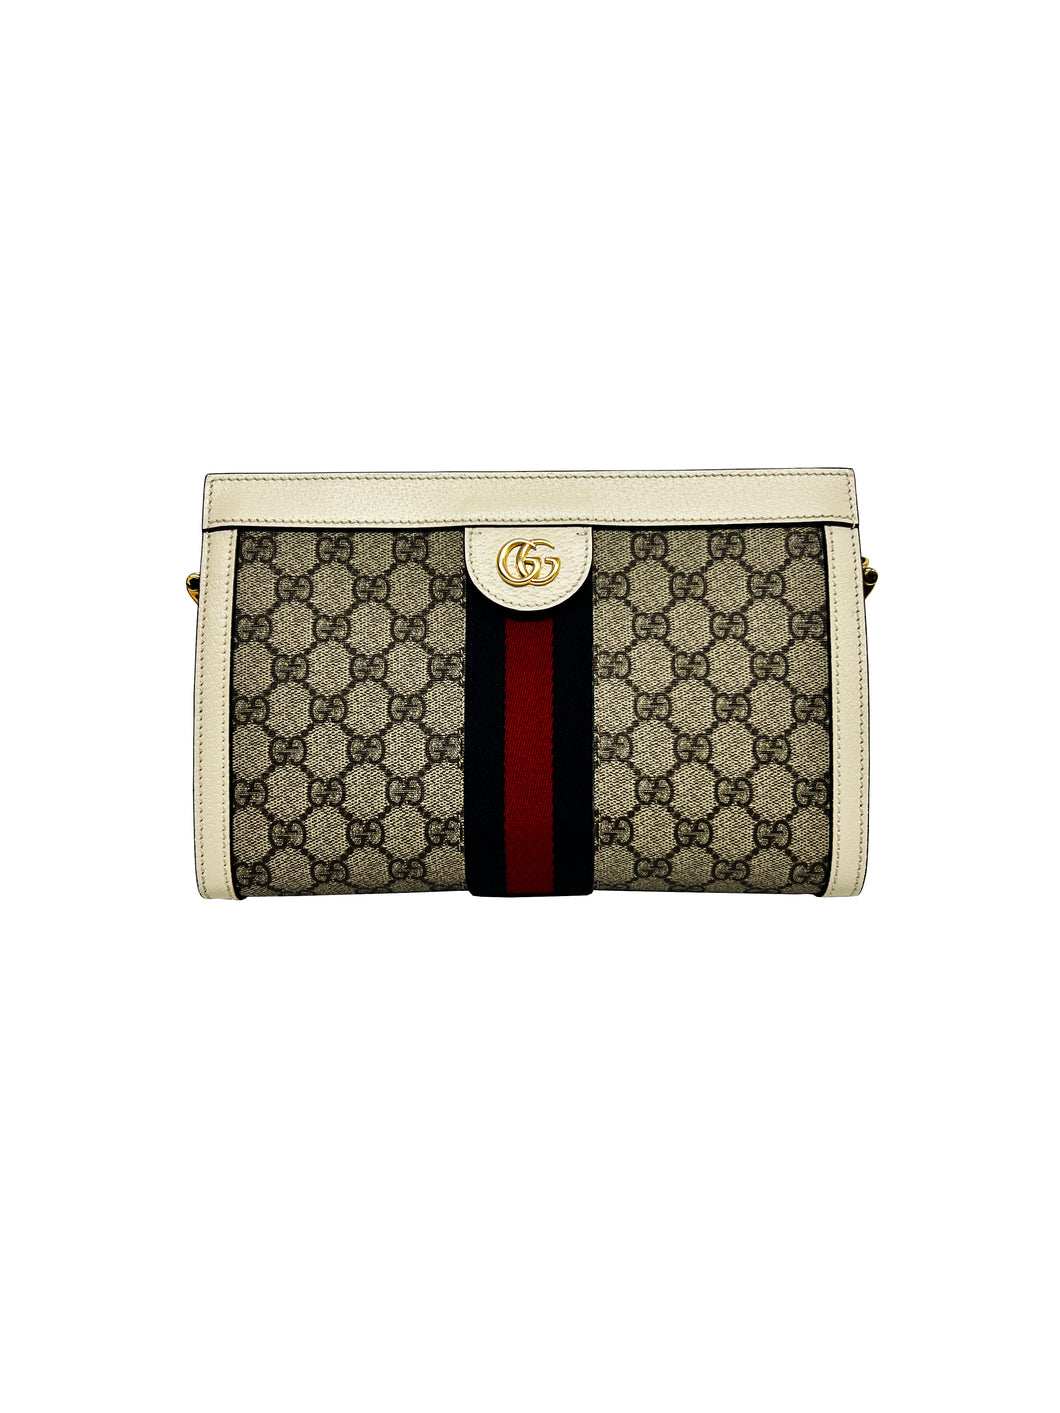 Gucci Small Ophidia Shoulder Bag White